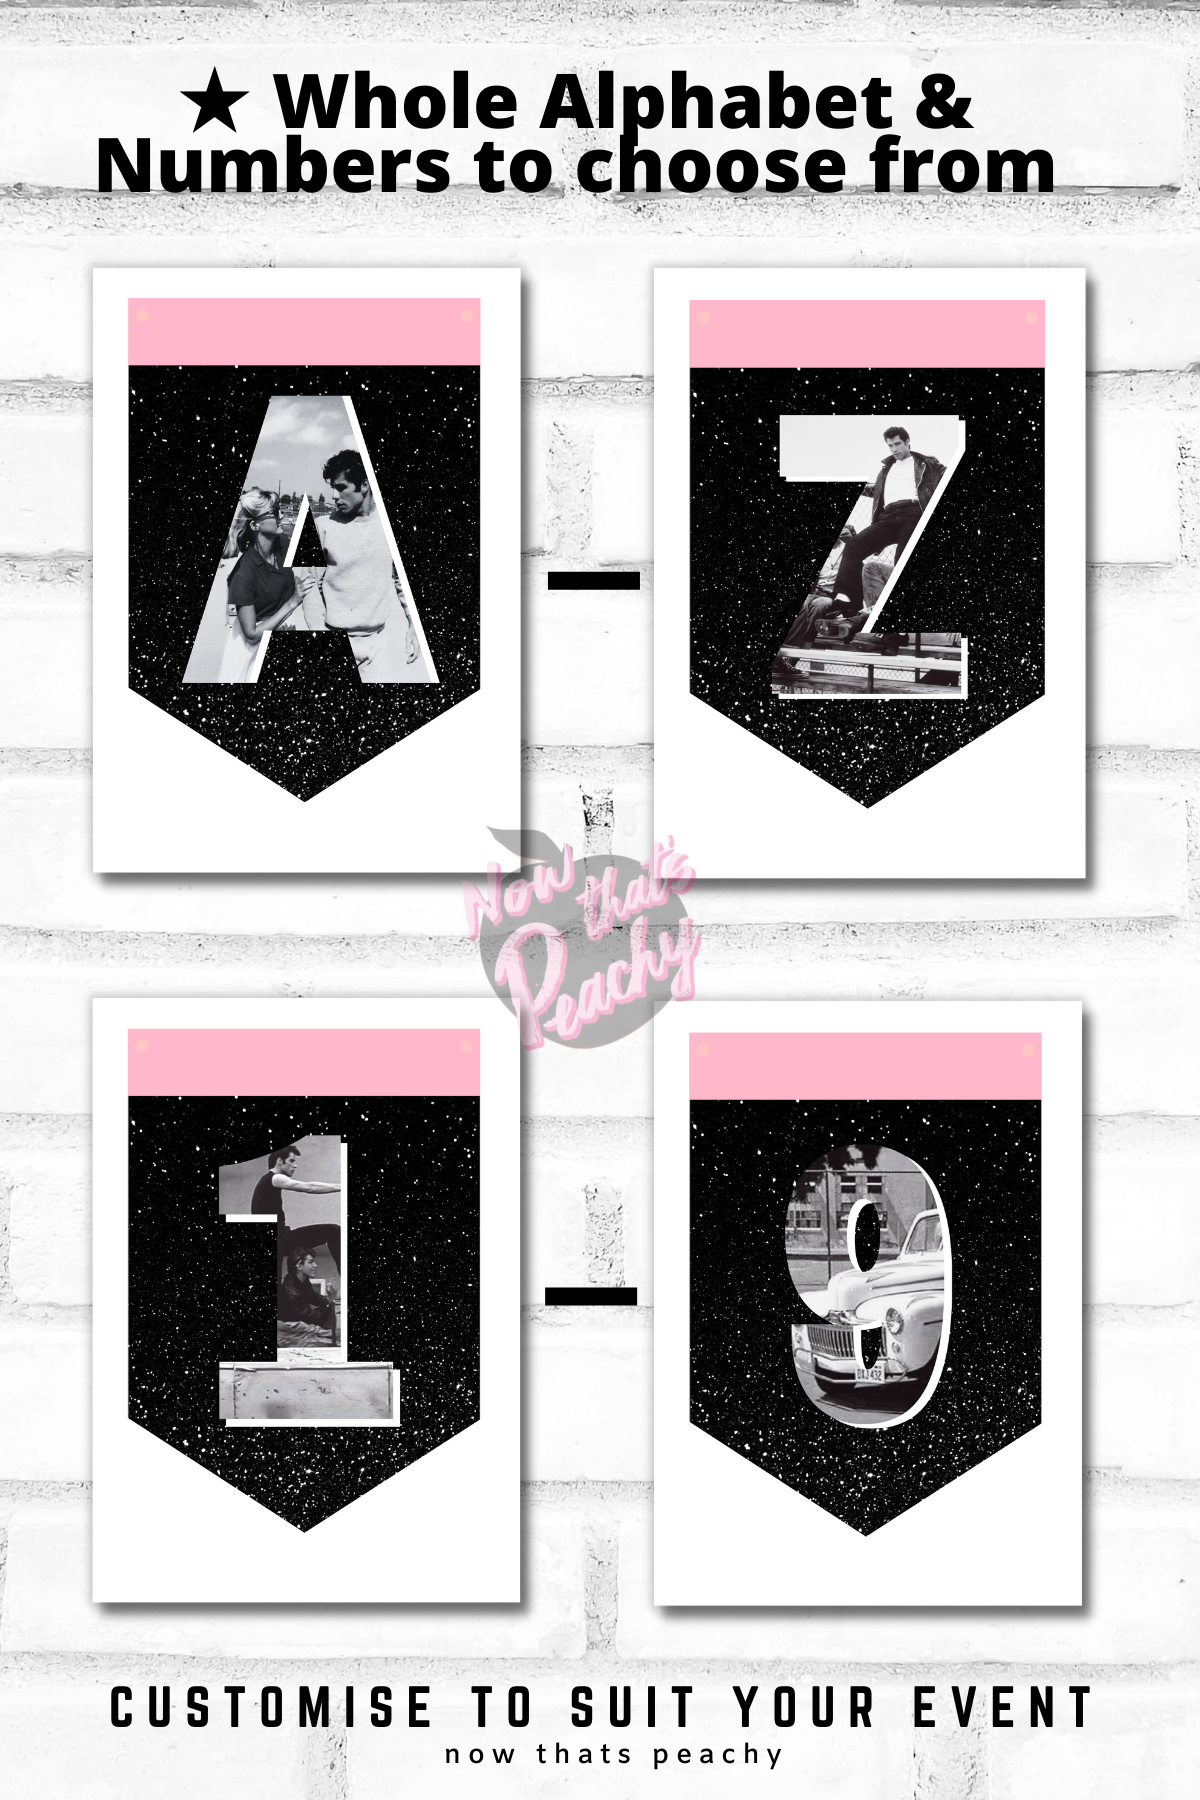 Grease Movie party character garland flag banner prop decorations decor photobooth template decorations 1950s fifties 50's printable template digital instant download edit Danny Sandy T-birds Pink Ladies  invite soda hop jukebox rockabilly rock'n'roll musical movie design pink black white modern color fun themed bachelorette birthday charity fundraiser event pack